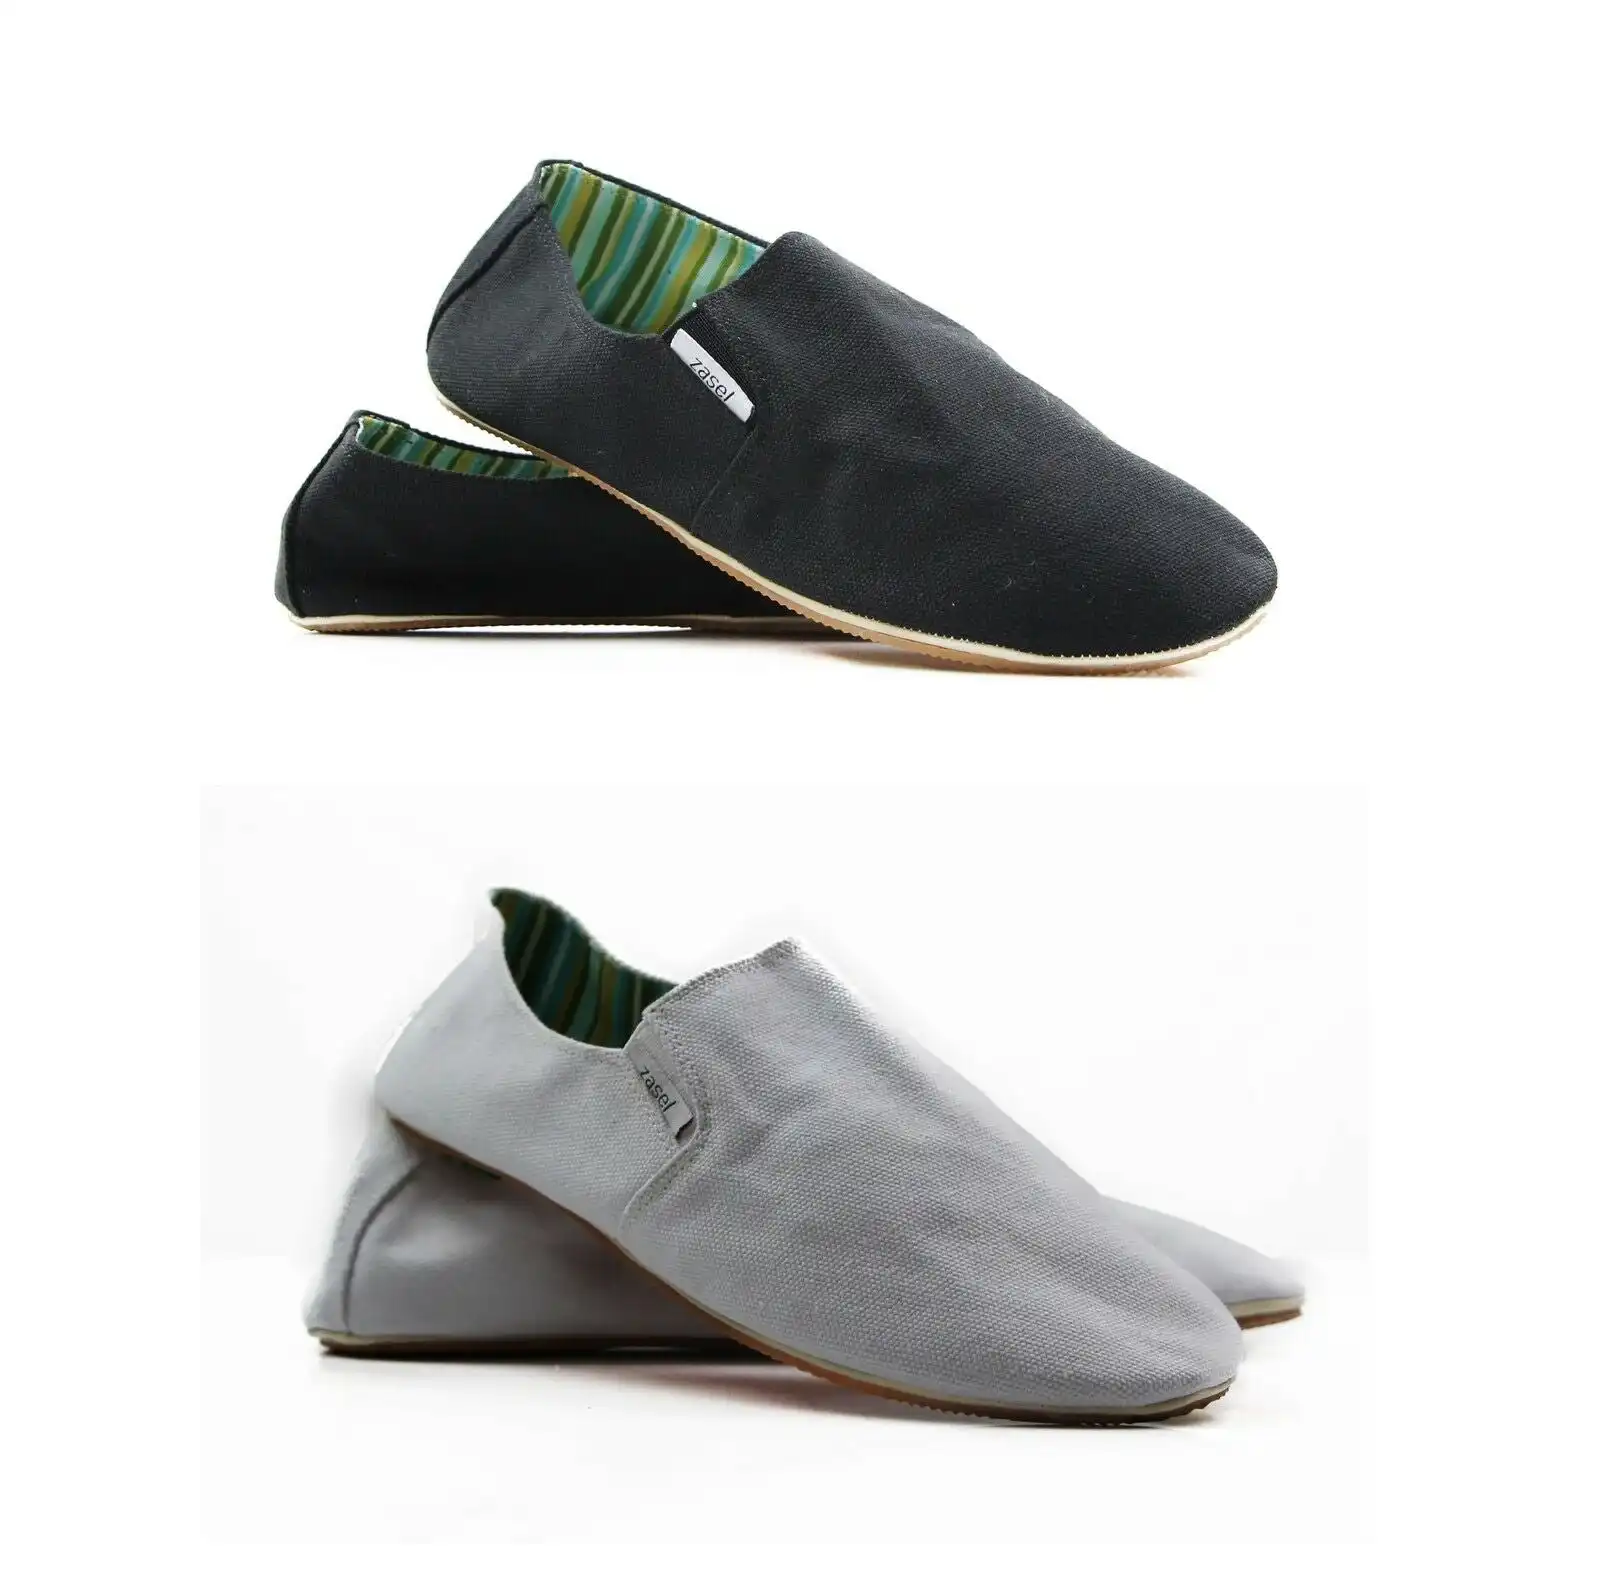 2 Pairs X Mens Zasel Black & White Cotton Canvas Slip On Flat Casual Flats Shoes